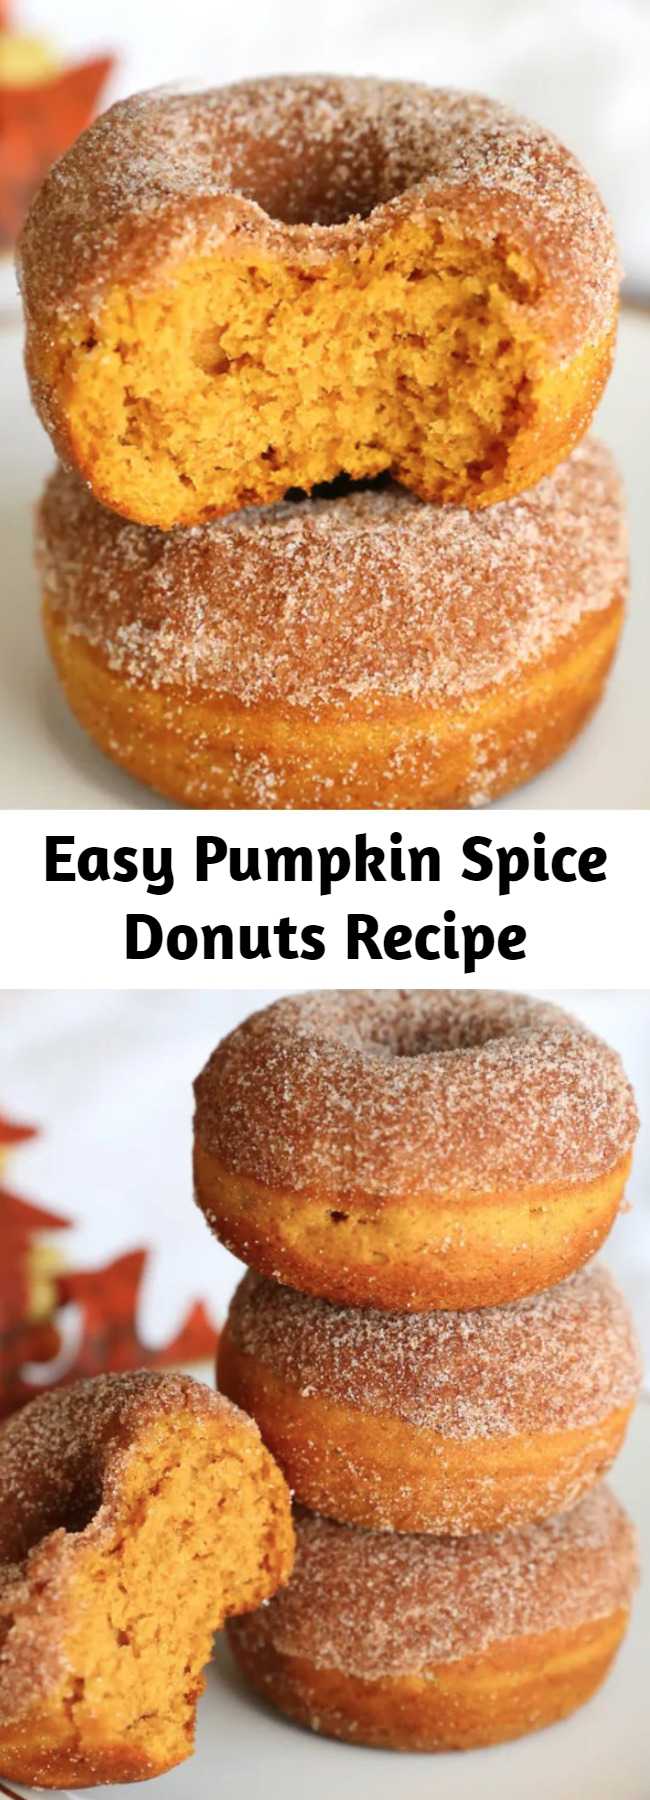 Easy Pumpkin Spice Donuts Recipe - Pumpkin Spice Donuts are your new favorite fall treat! They're baked, not fried, and they are perfectly soft + delicious and full of pumpkin spice flavor with a crunchy cinnamon sugar topping.